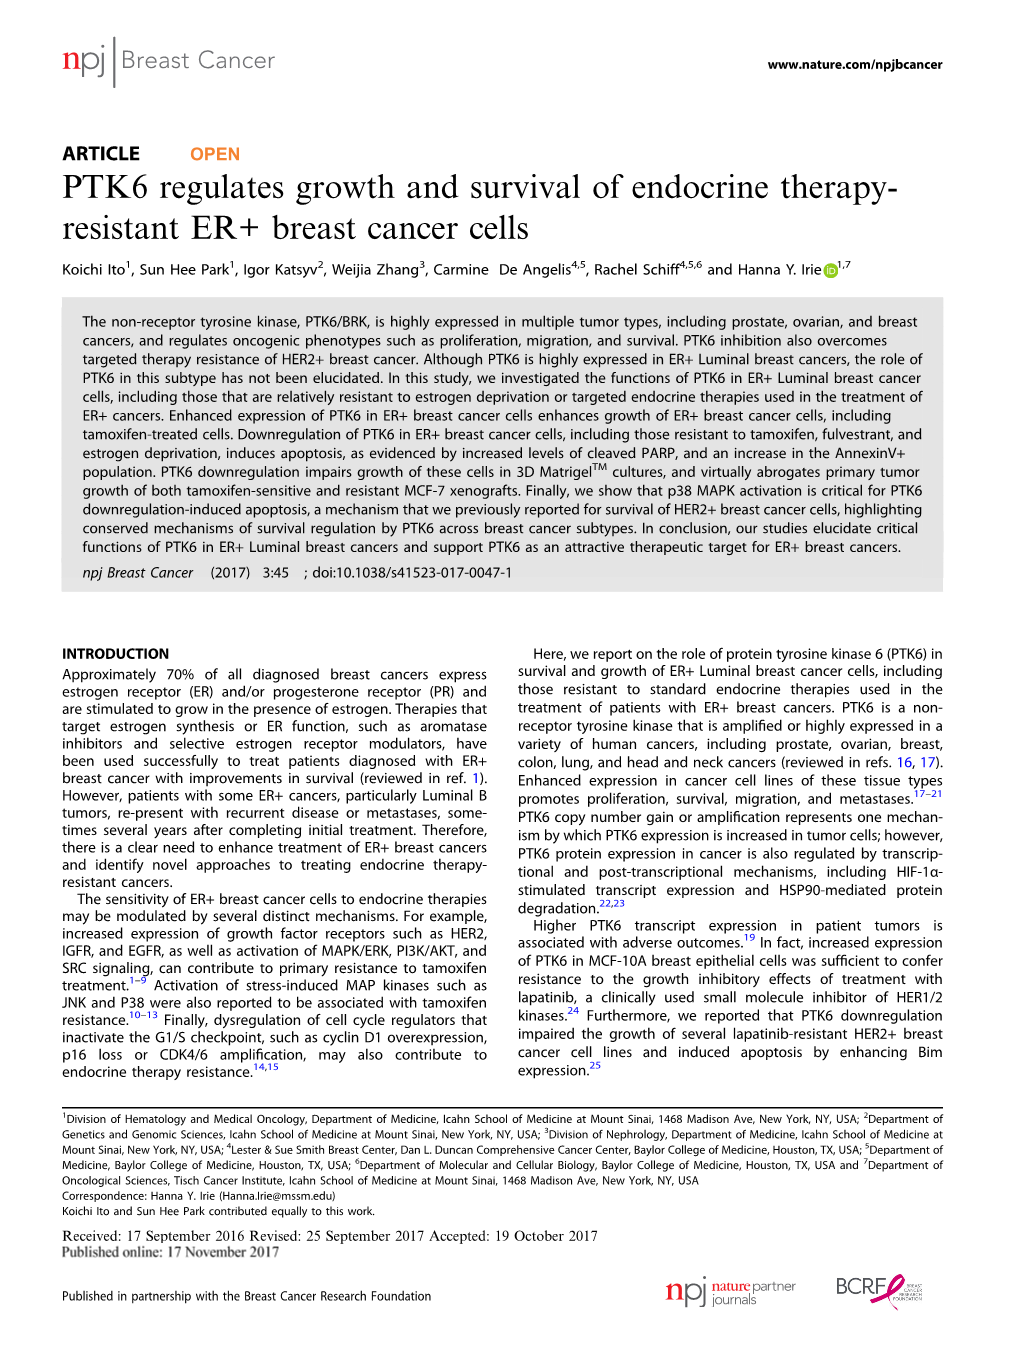 PTK6 Regulates Growth and Survival of Endocrine Therapy-Resistant ER+